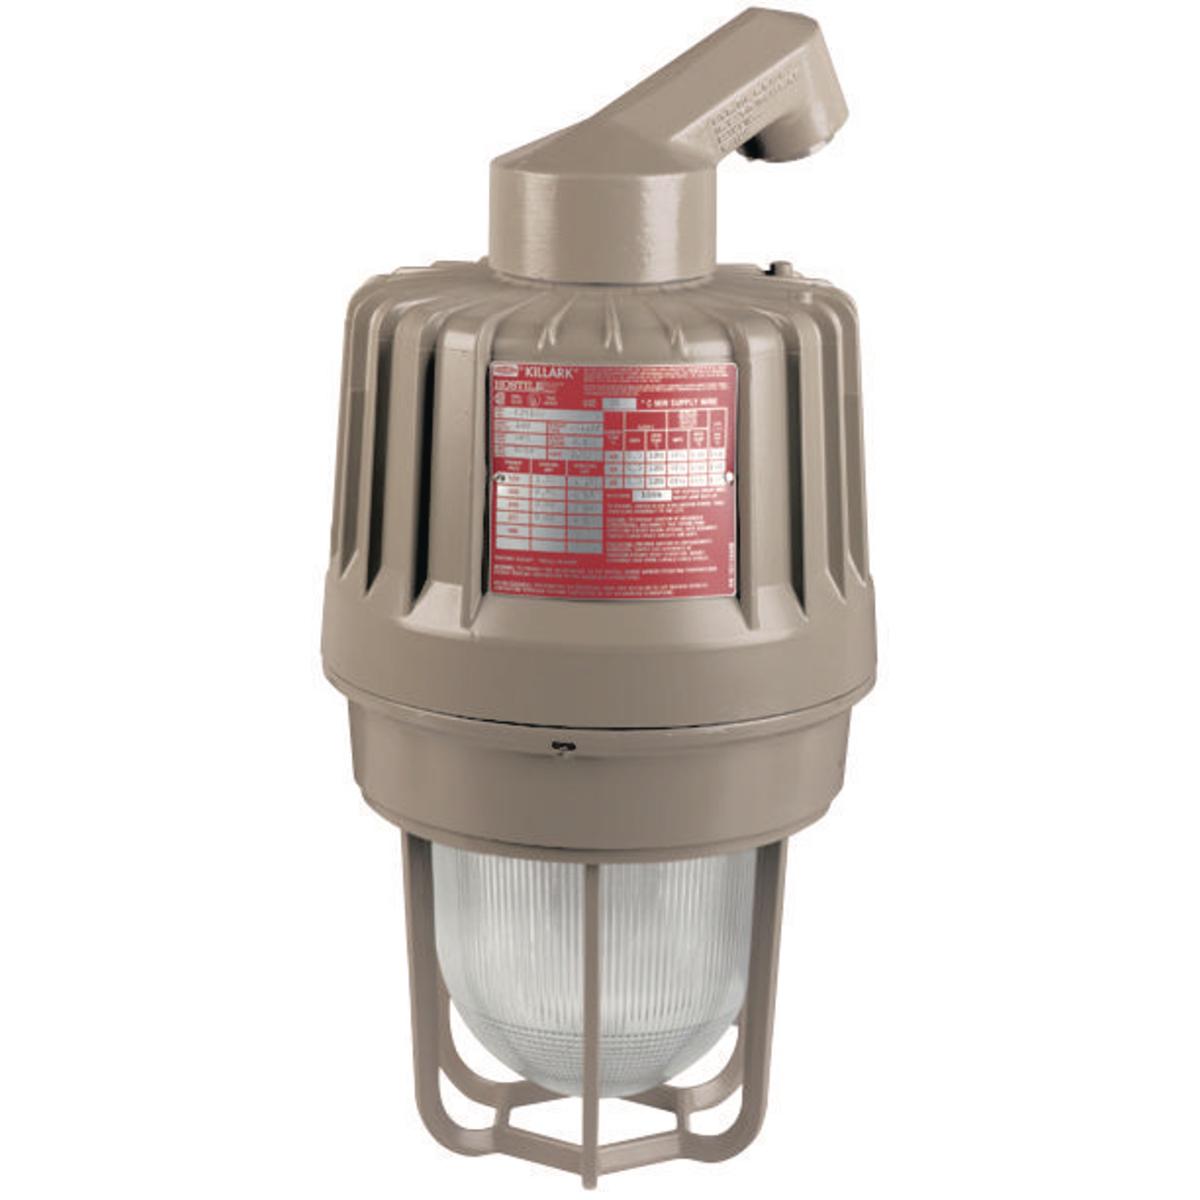 Hubbell EZS100D4 HID 100W Quadri-Volt High Pressure Sodium 1-1/4" Stanchion Mount  ; Three light sources – High Pressure Sodium (50-400W), Metal Halide (70-400W) and Pulse Start Metal Halide (175-400W) ; Mounting choice –Pendant, ceiling, 25˚ stanchion or 90˚ wall mount, 